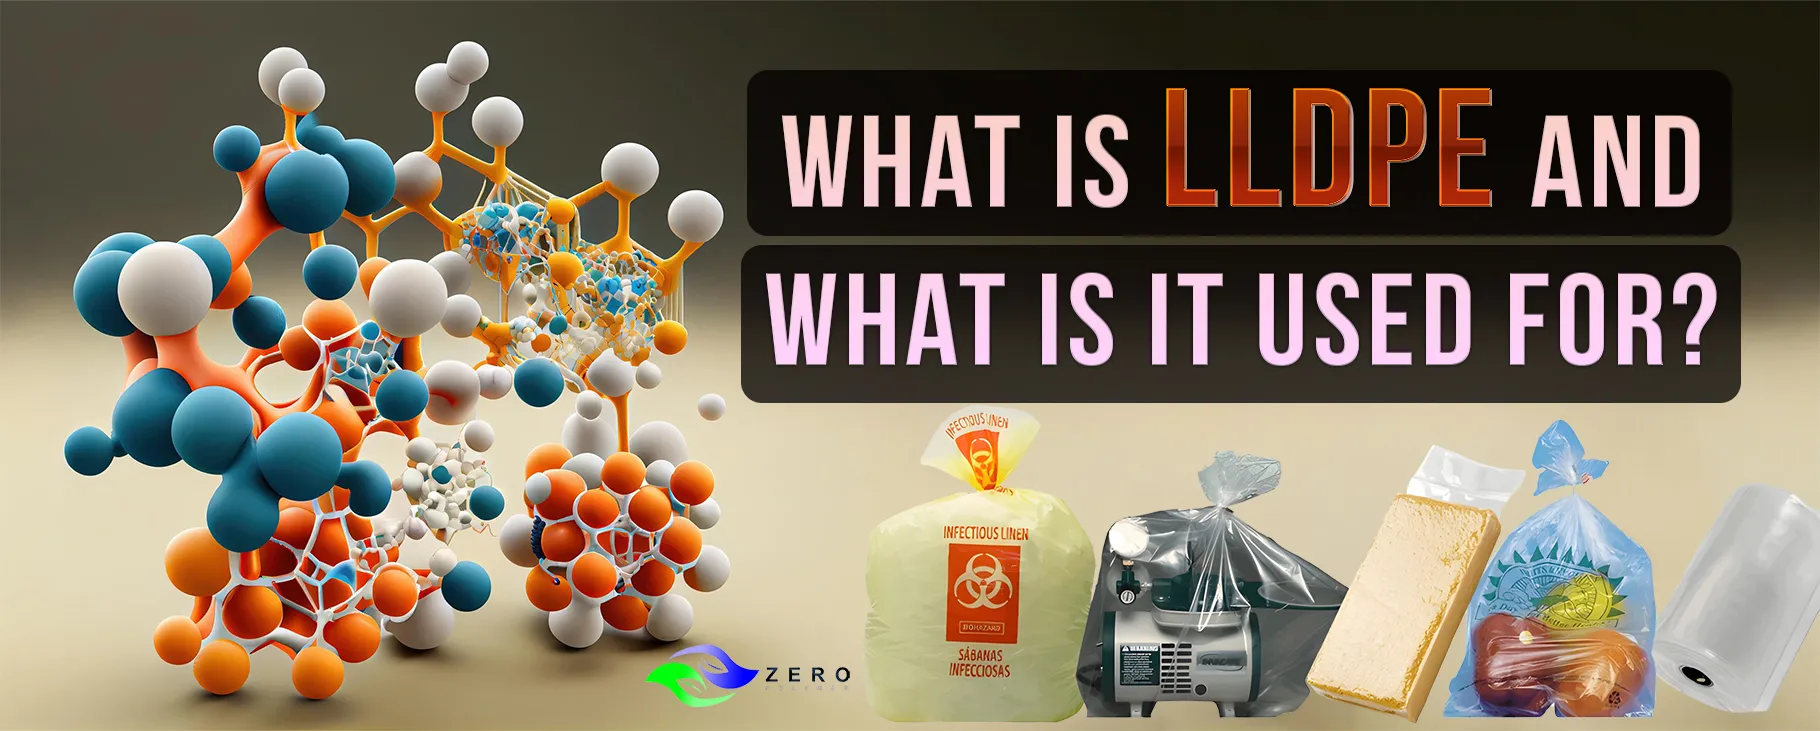 what is lldpe and what is it used for?